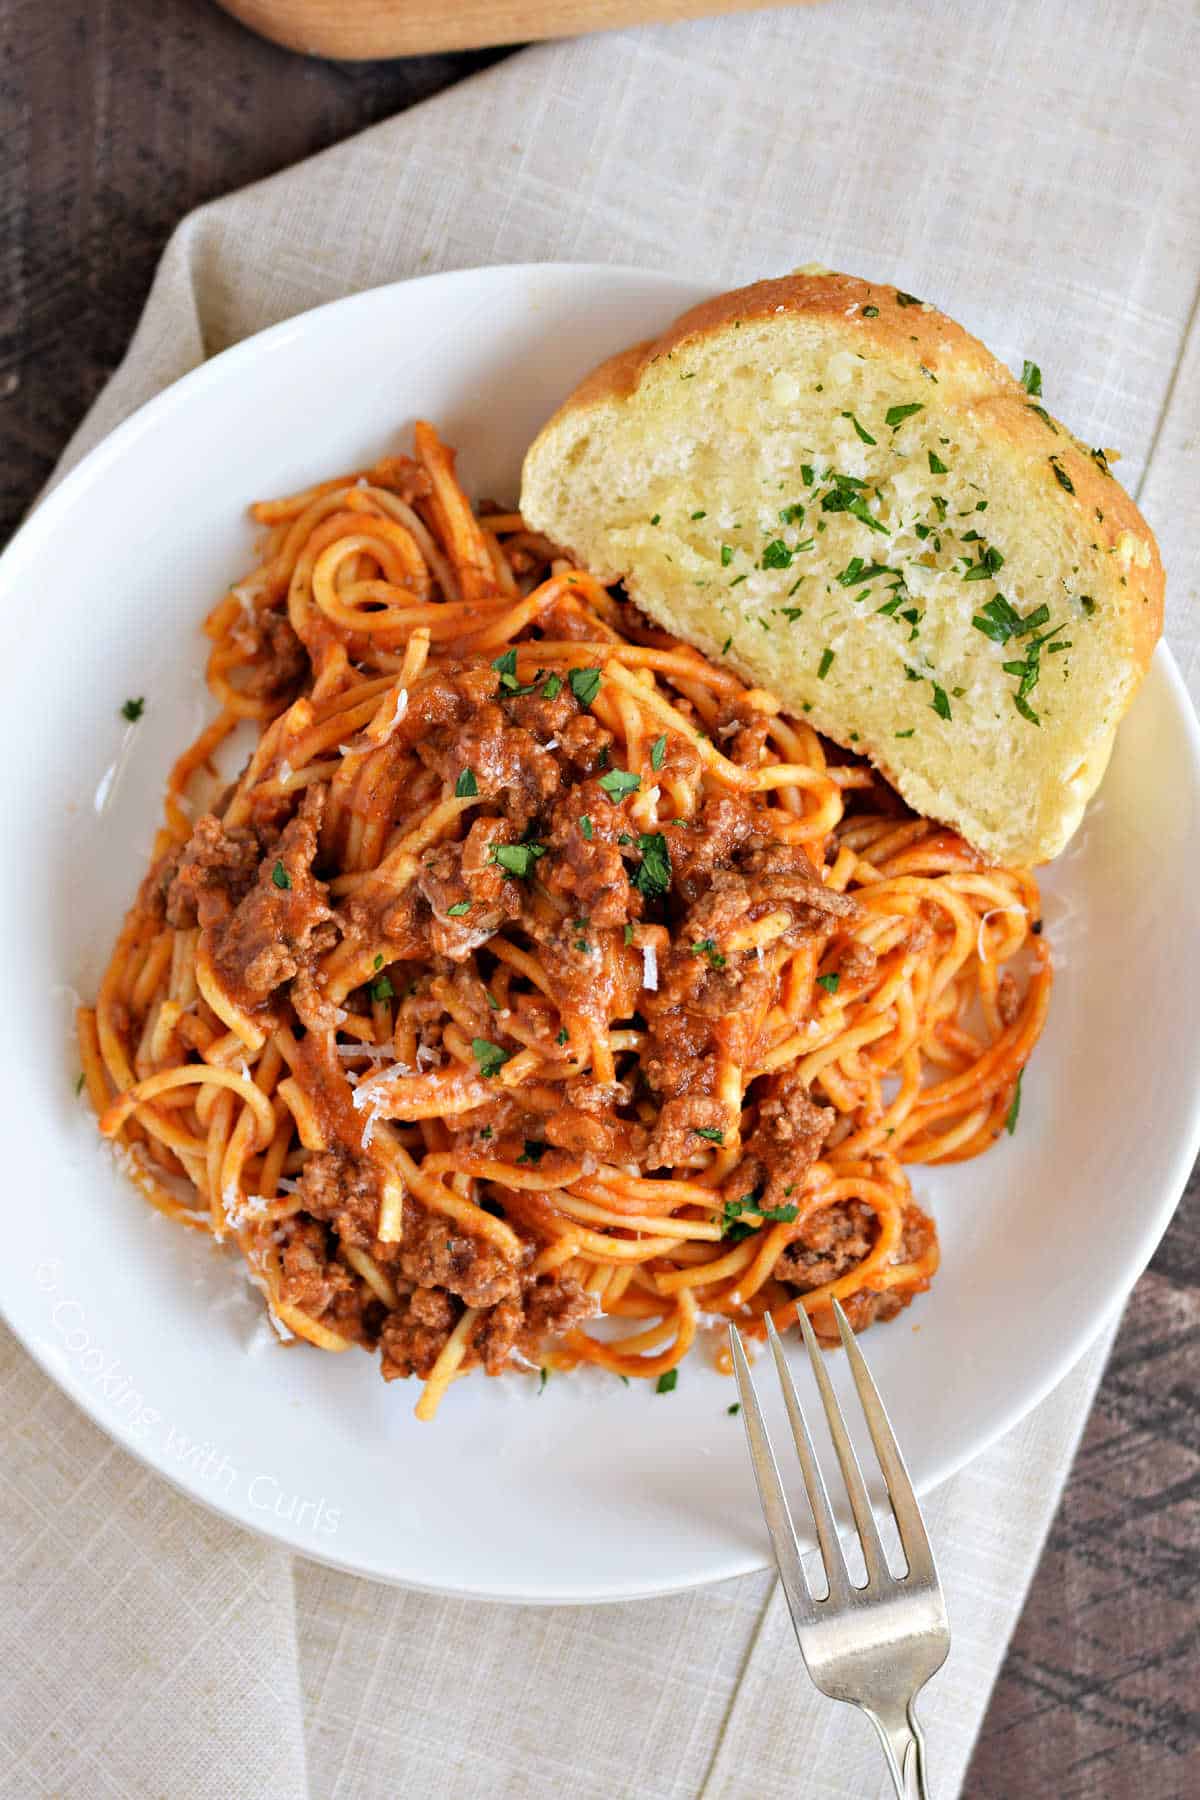 A bowl of spaghetti with a slice of garlic bread on the rim of the bowl.